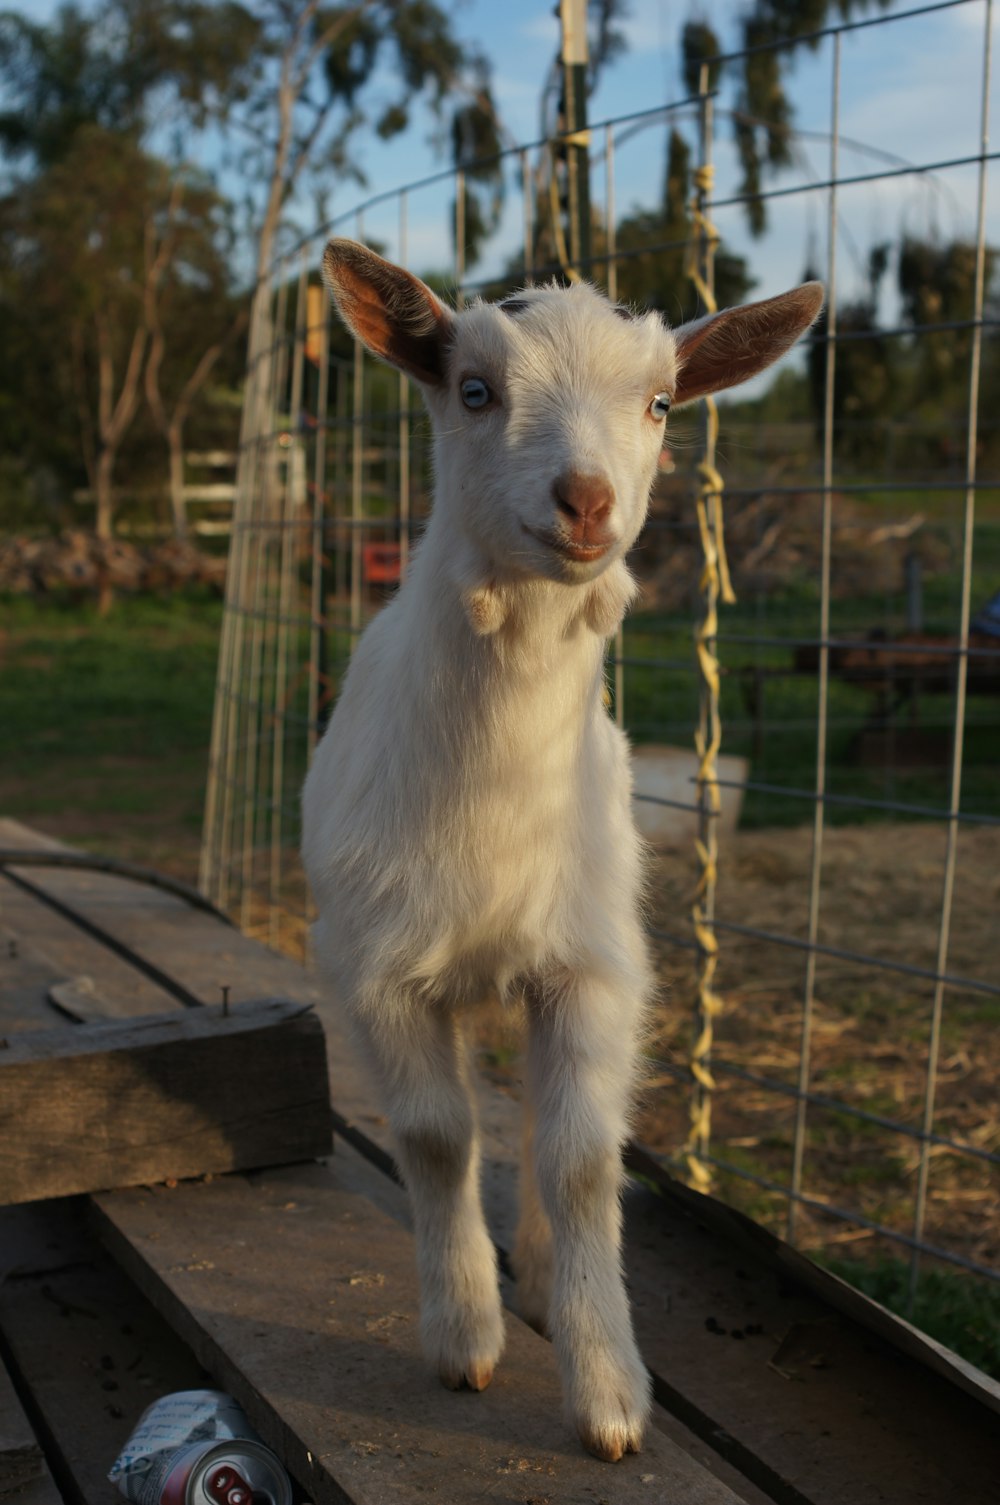 a small white goat standing on a wooden platform